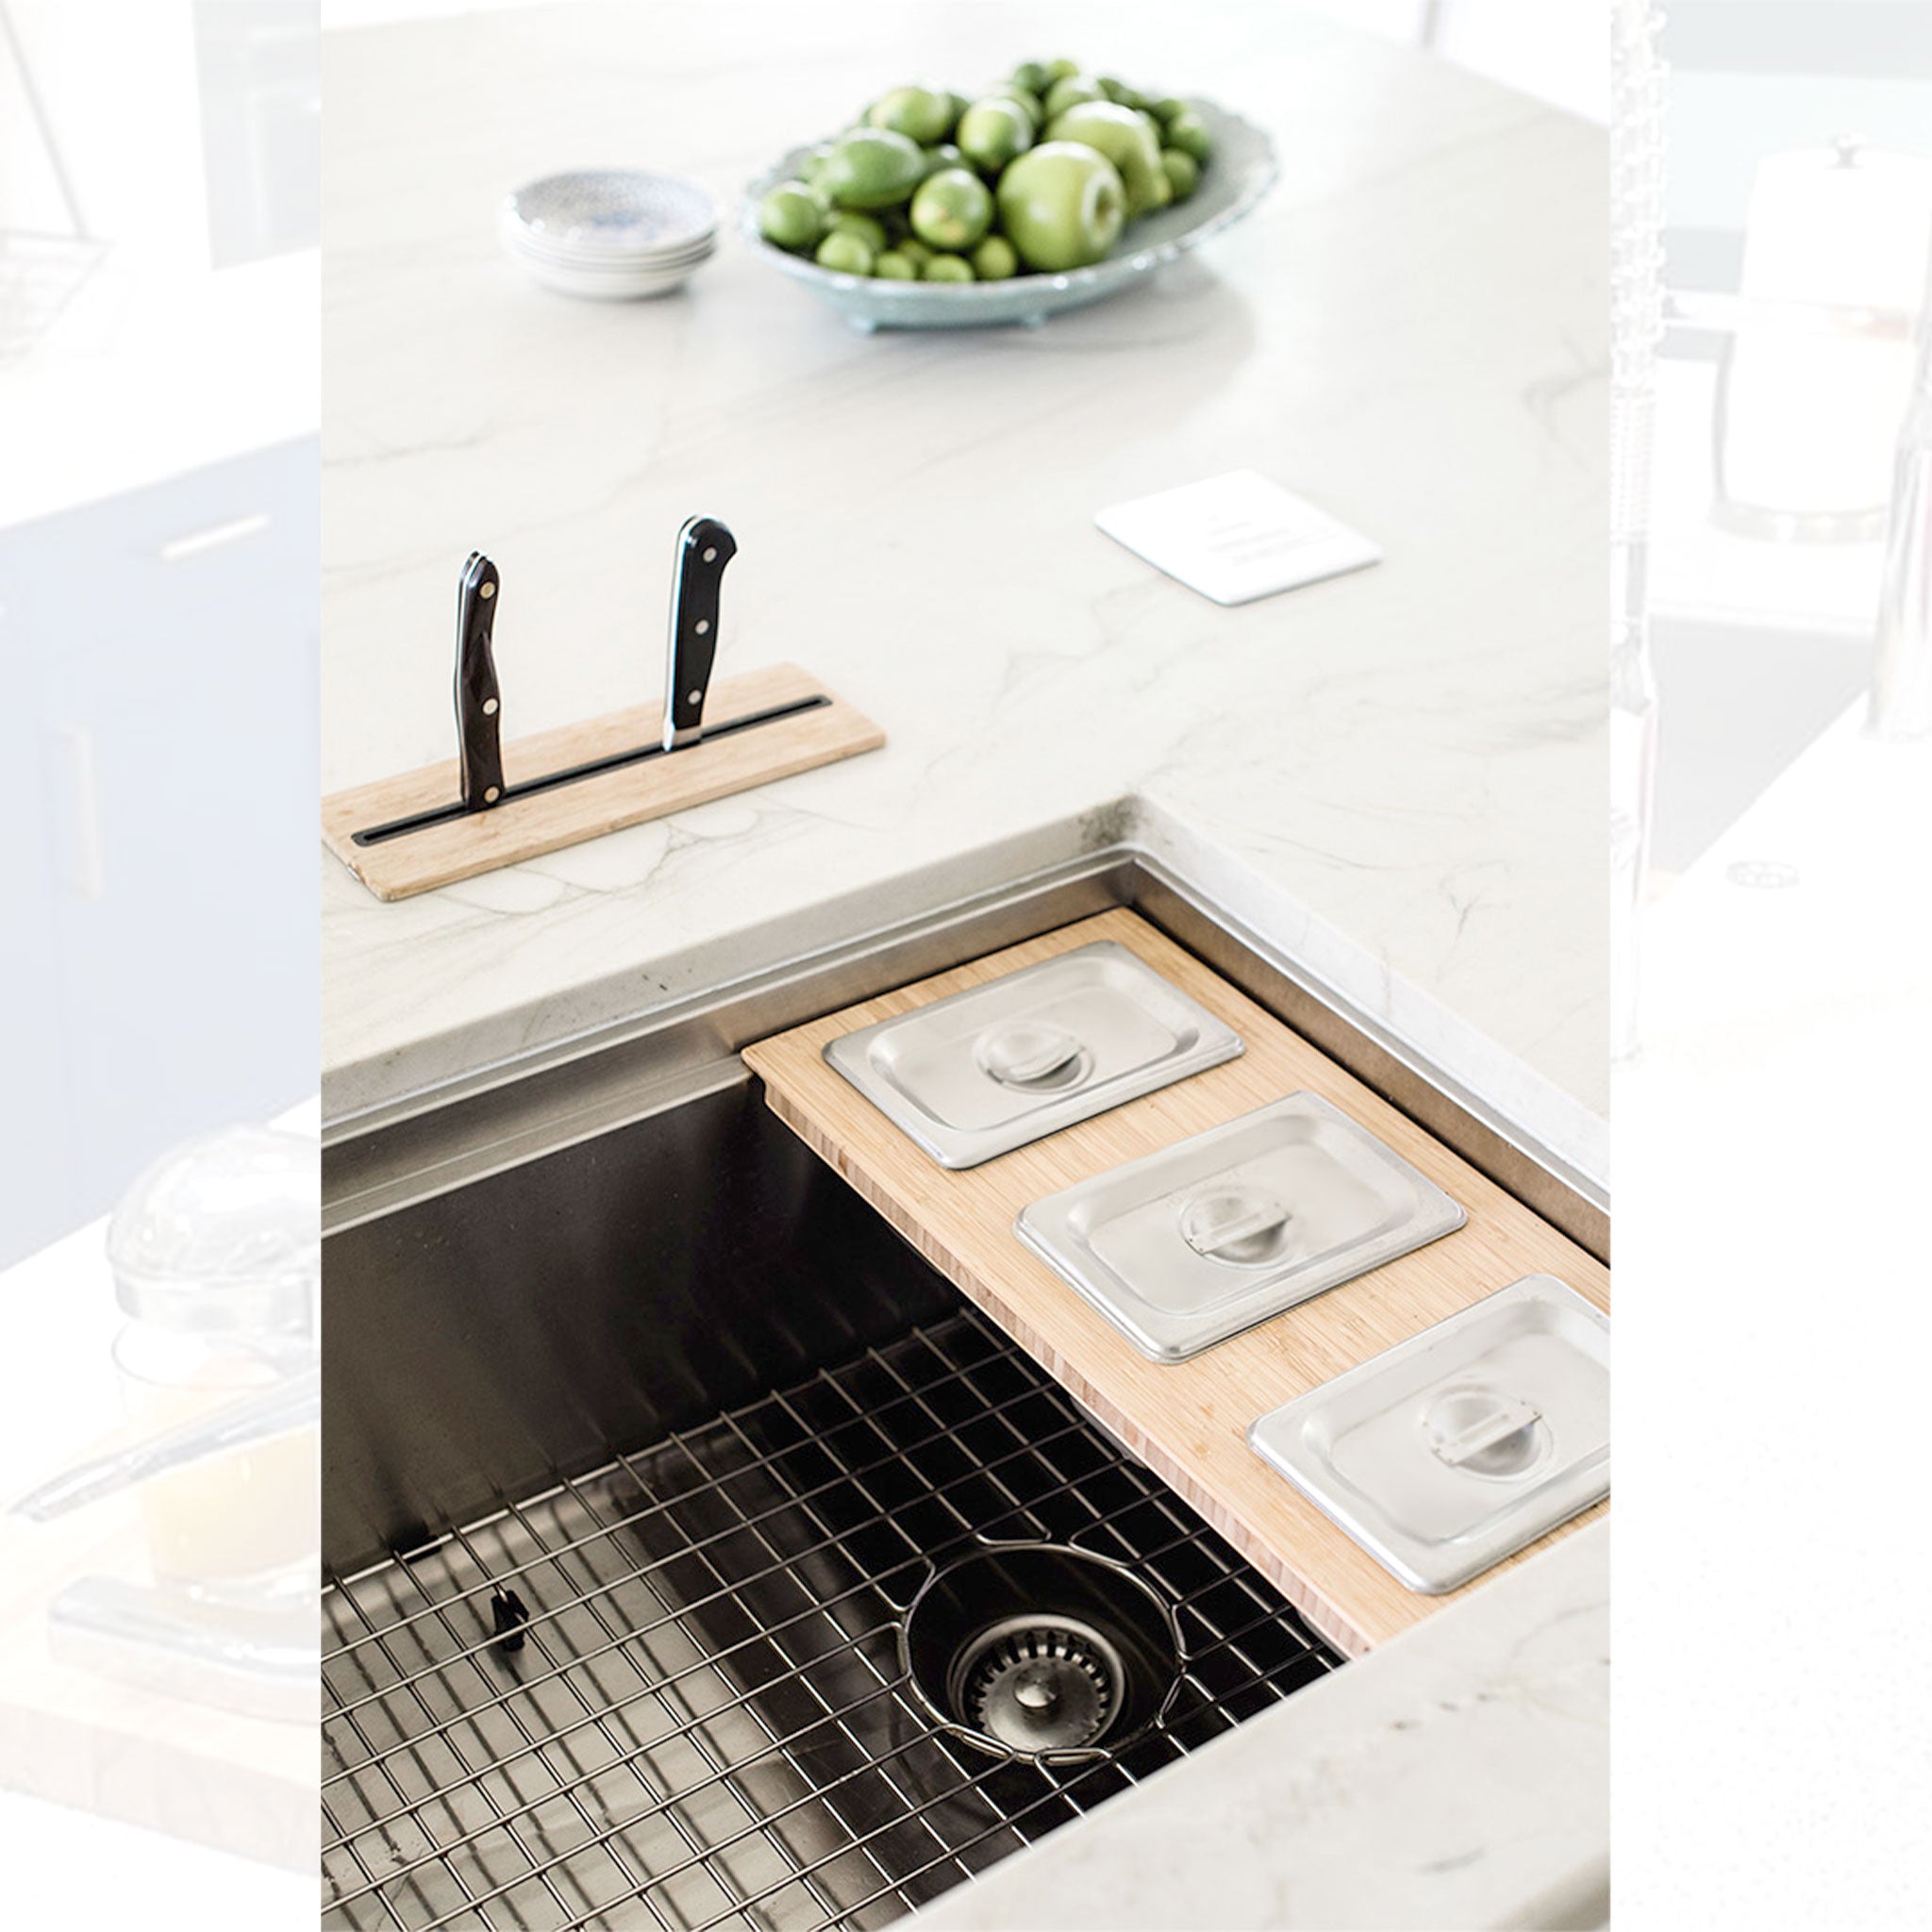 Basin grate and bambo serving board in a 33 inch workstation sink